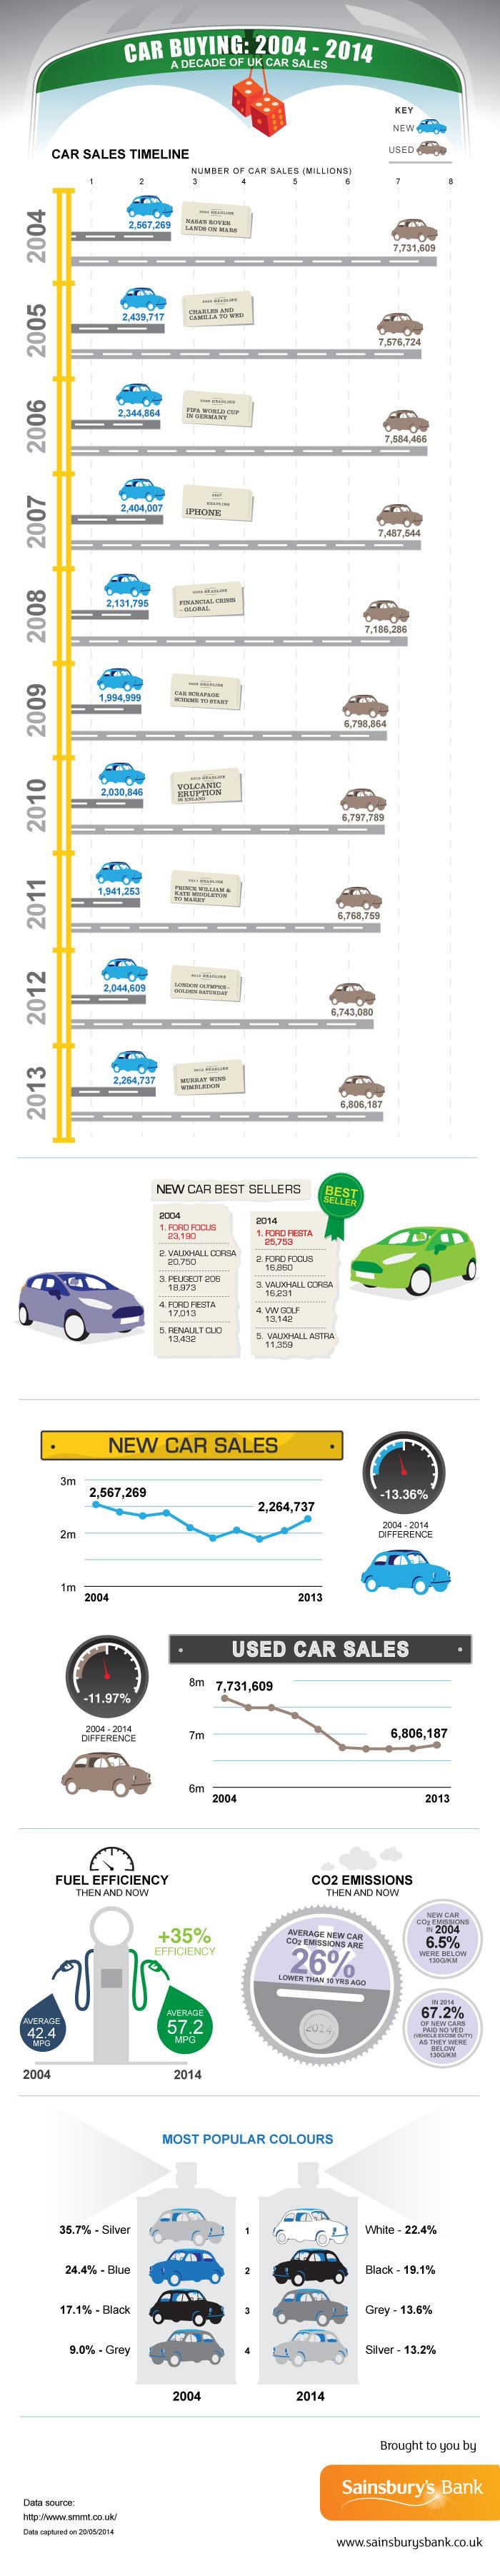 car buying figures from 2004 to 2014